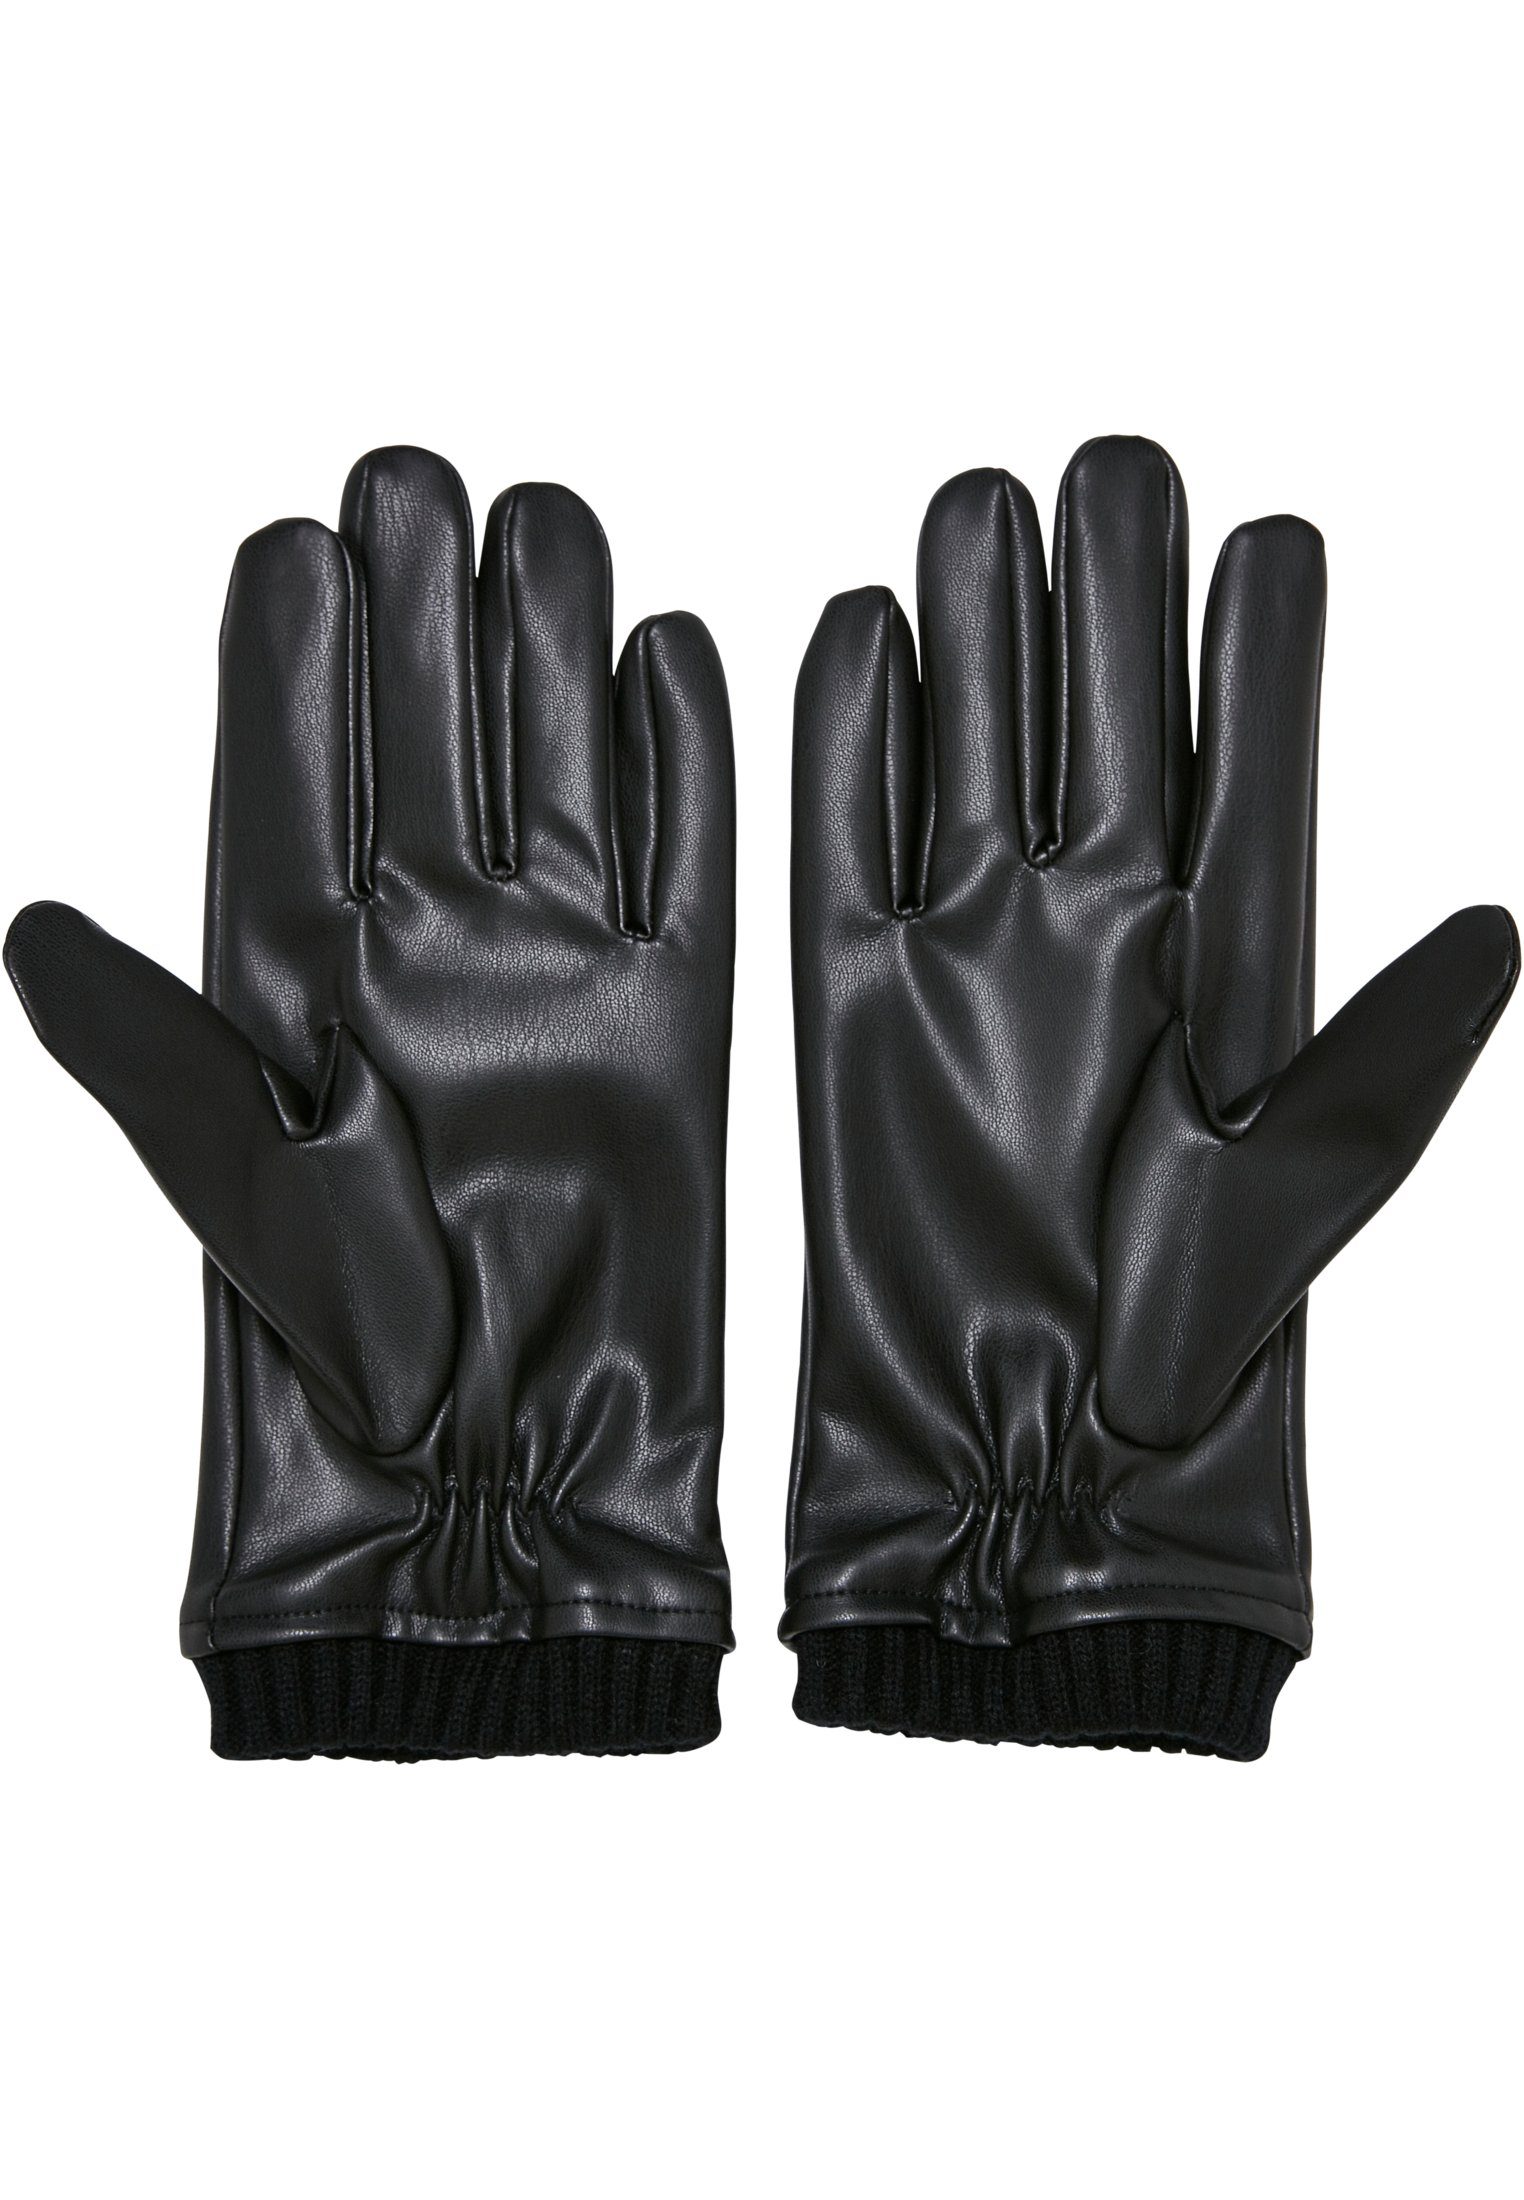 Unisex CLASSICS Synthetic Leather Basic Baumwollhandschuhe Gloves URBAN